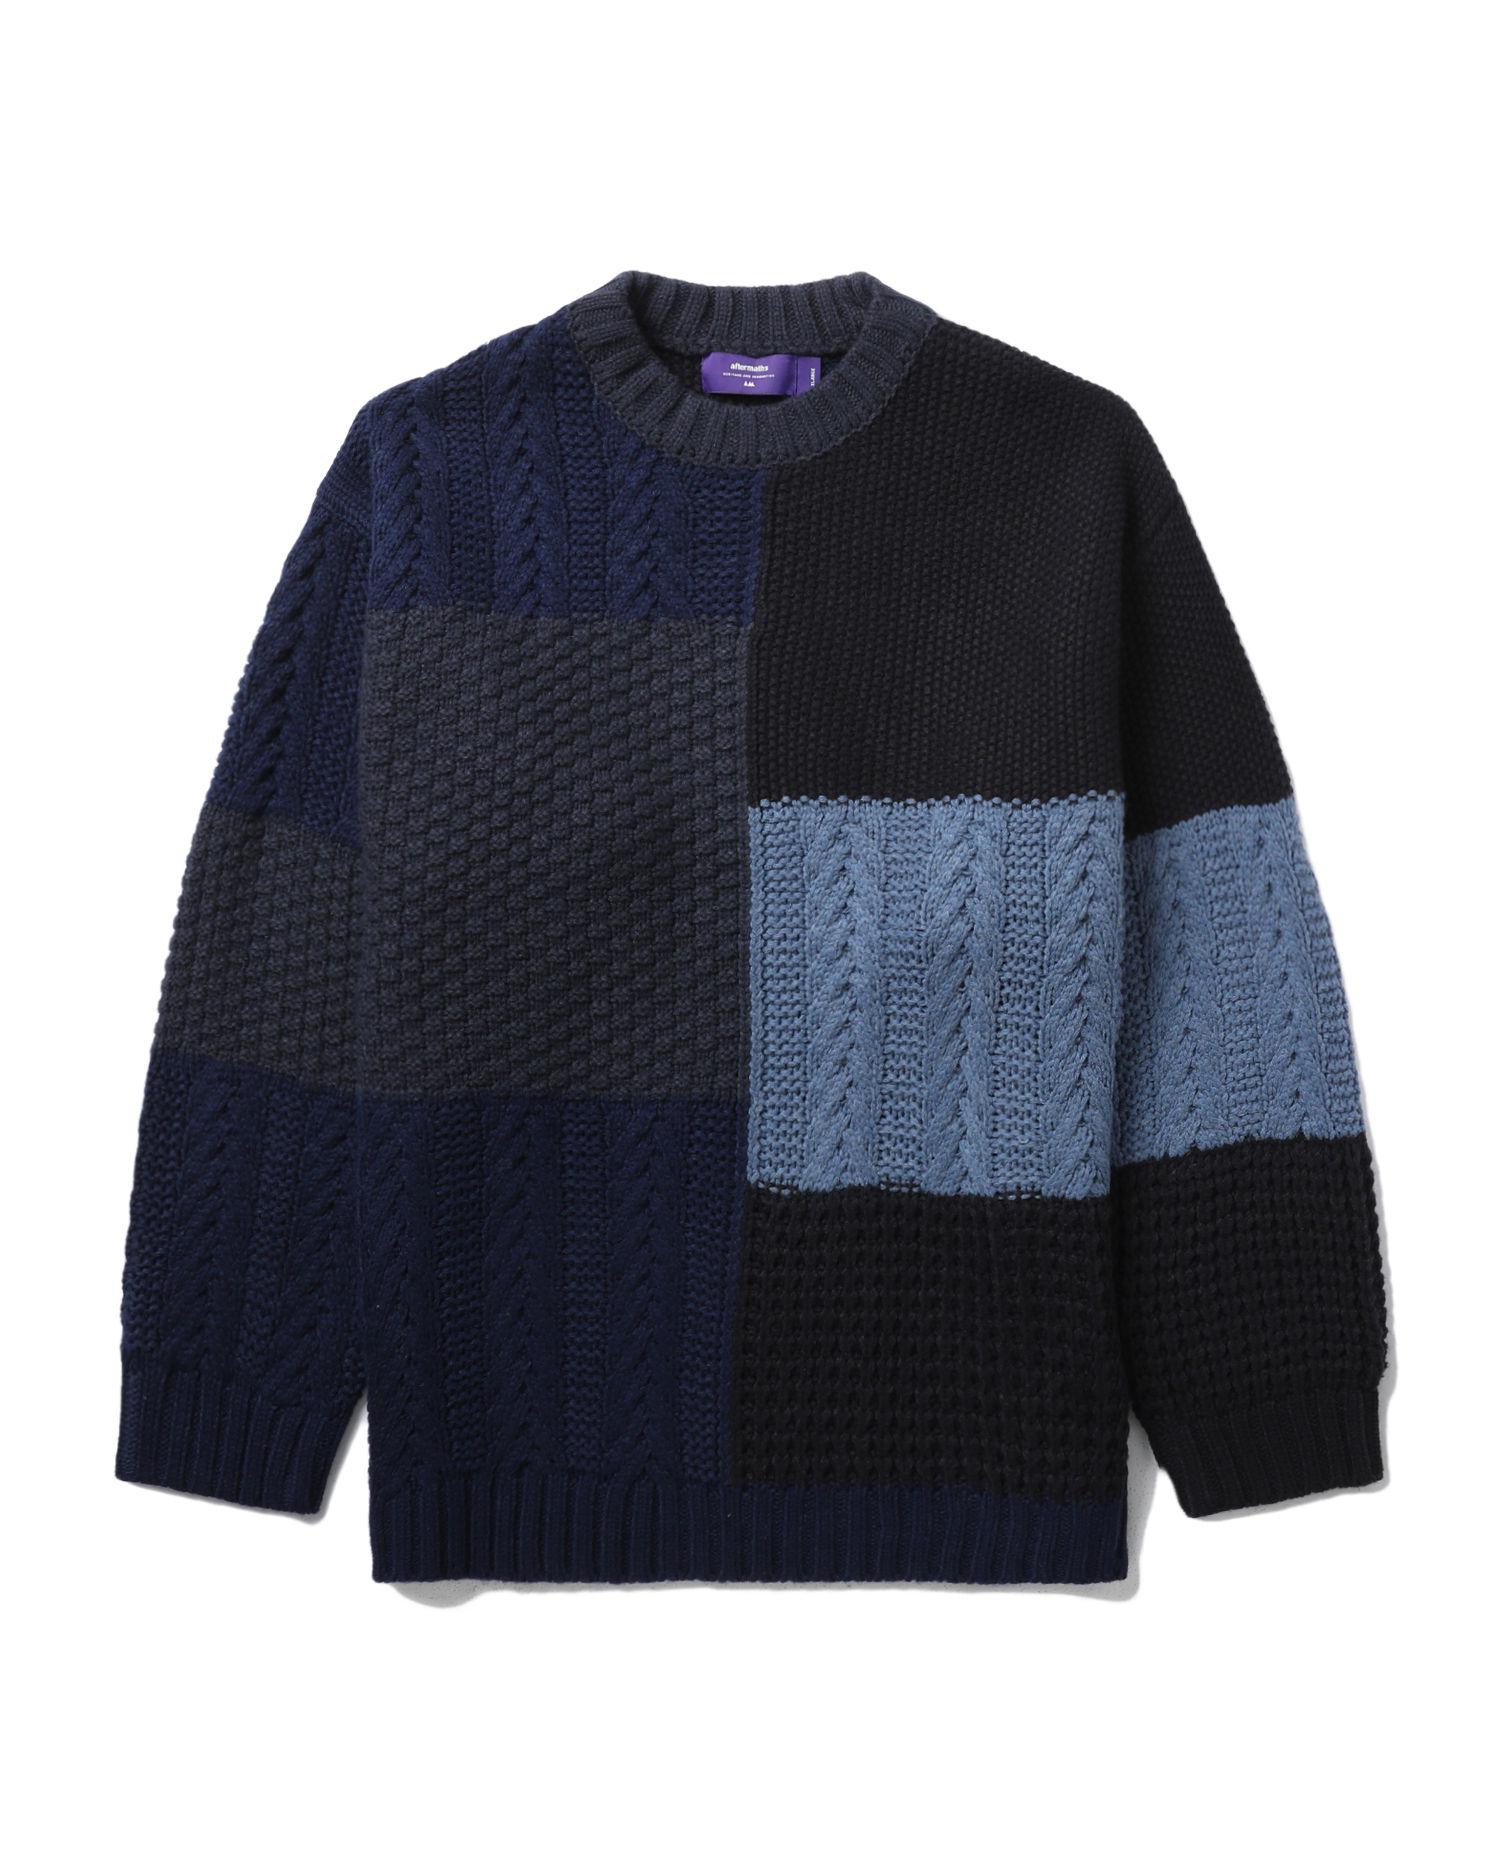 Patchwork knit crew neck by AFTERMATHS